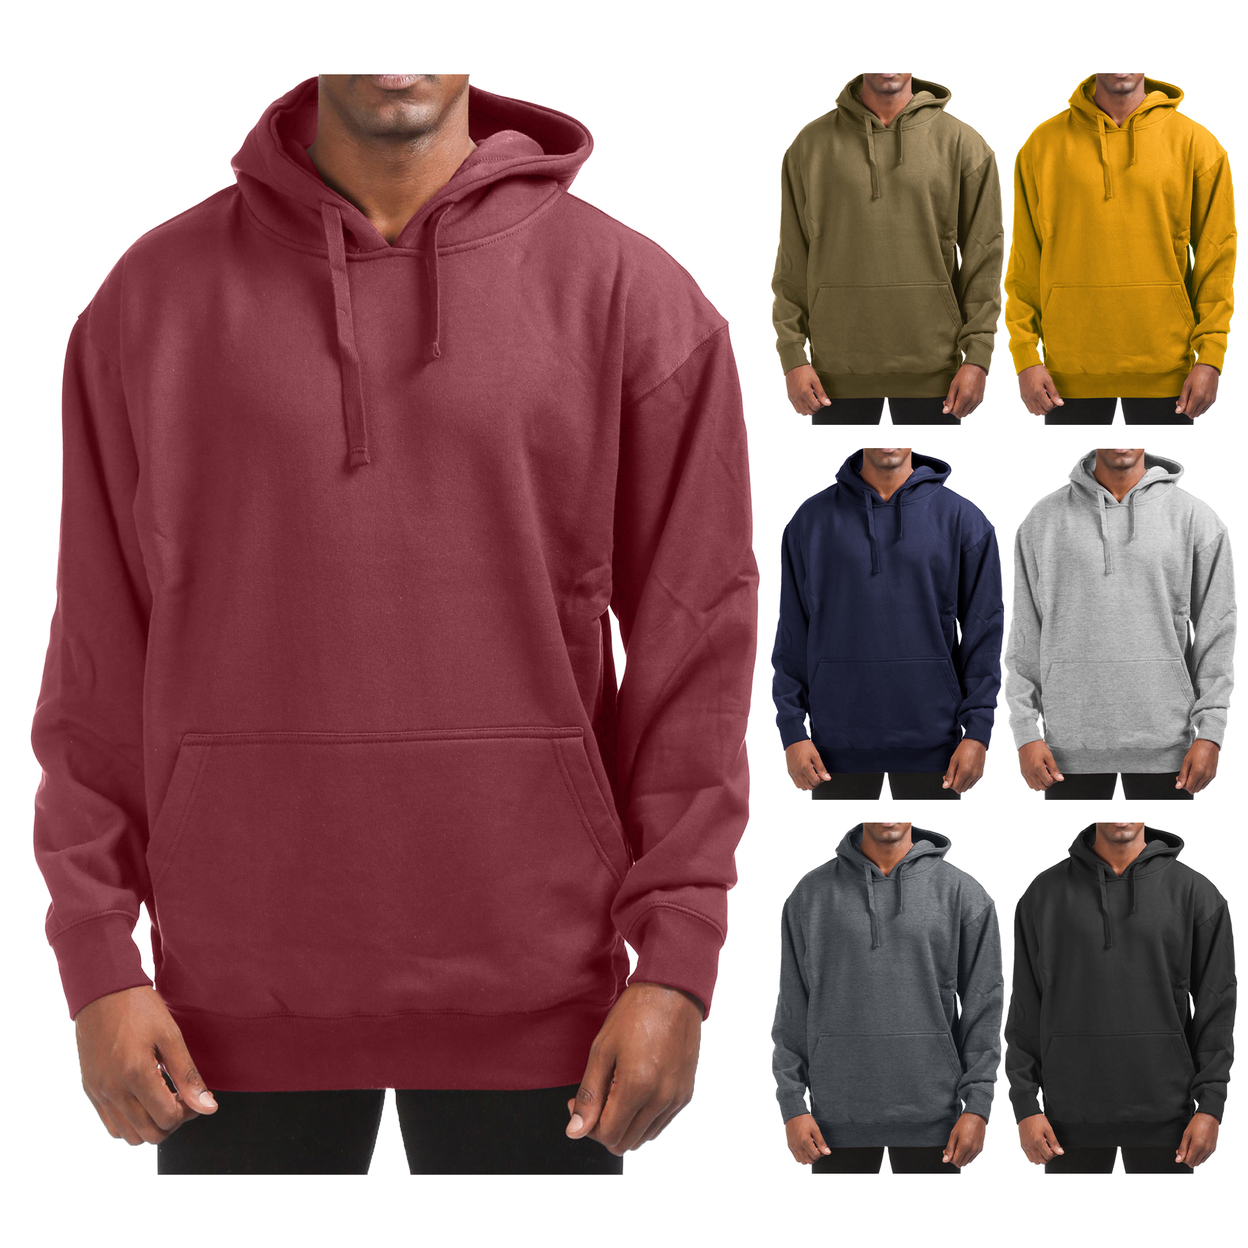 Men's Super-Soft Winter Warm Cotton Blend Fleece Pullover Hoodie With Kangaroo Pocket - Red, Small